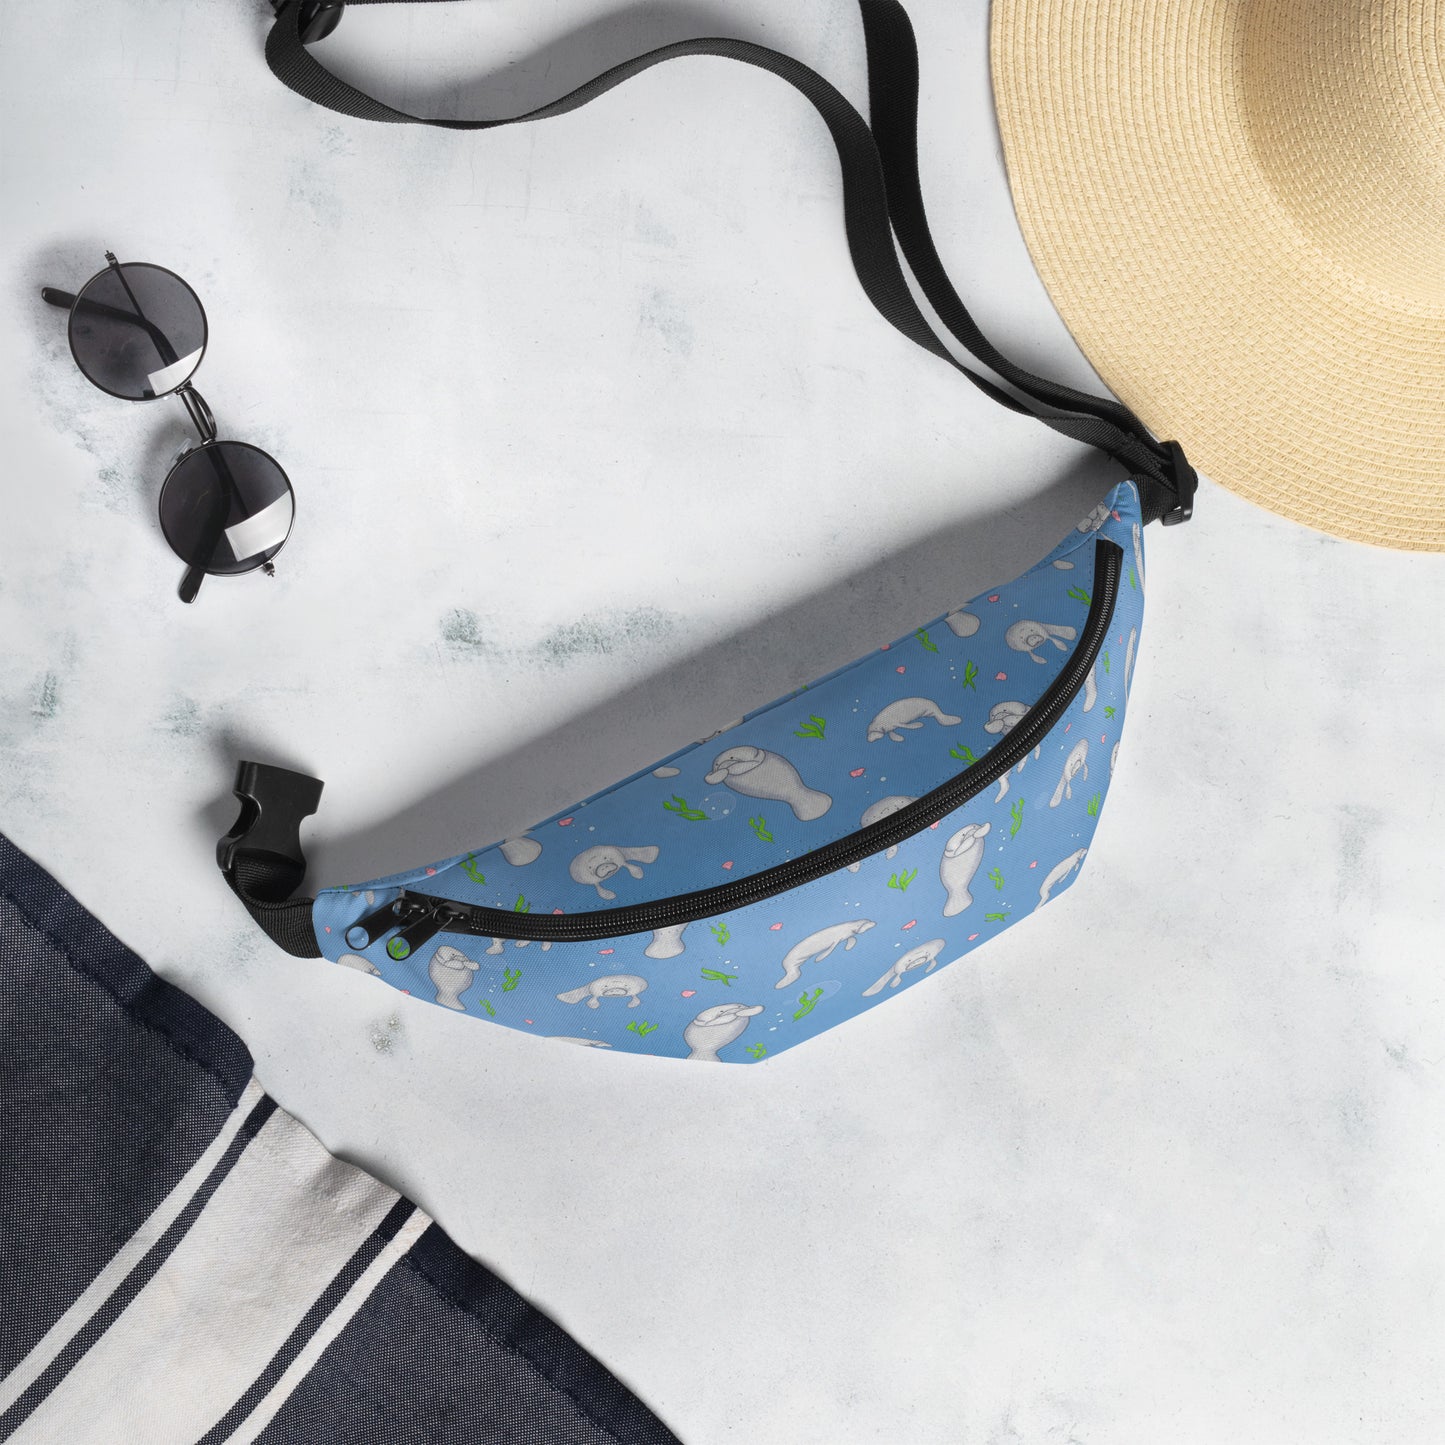 Cute manatee patterned belt bag with adjustable straps, zippered pouch, and small inner pocket. Shown next to sunhat and sunglasses.